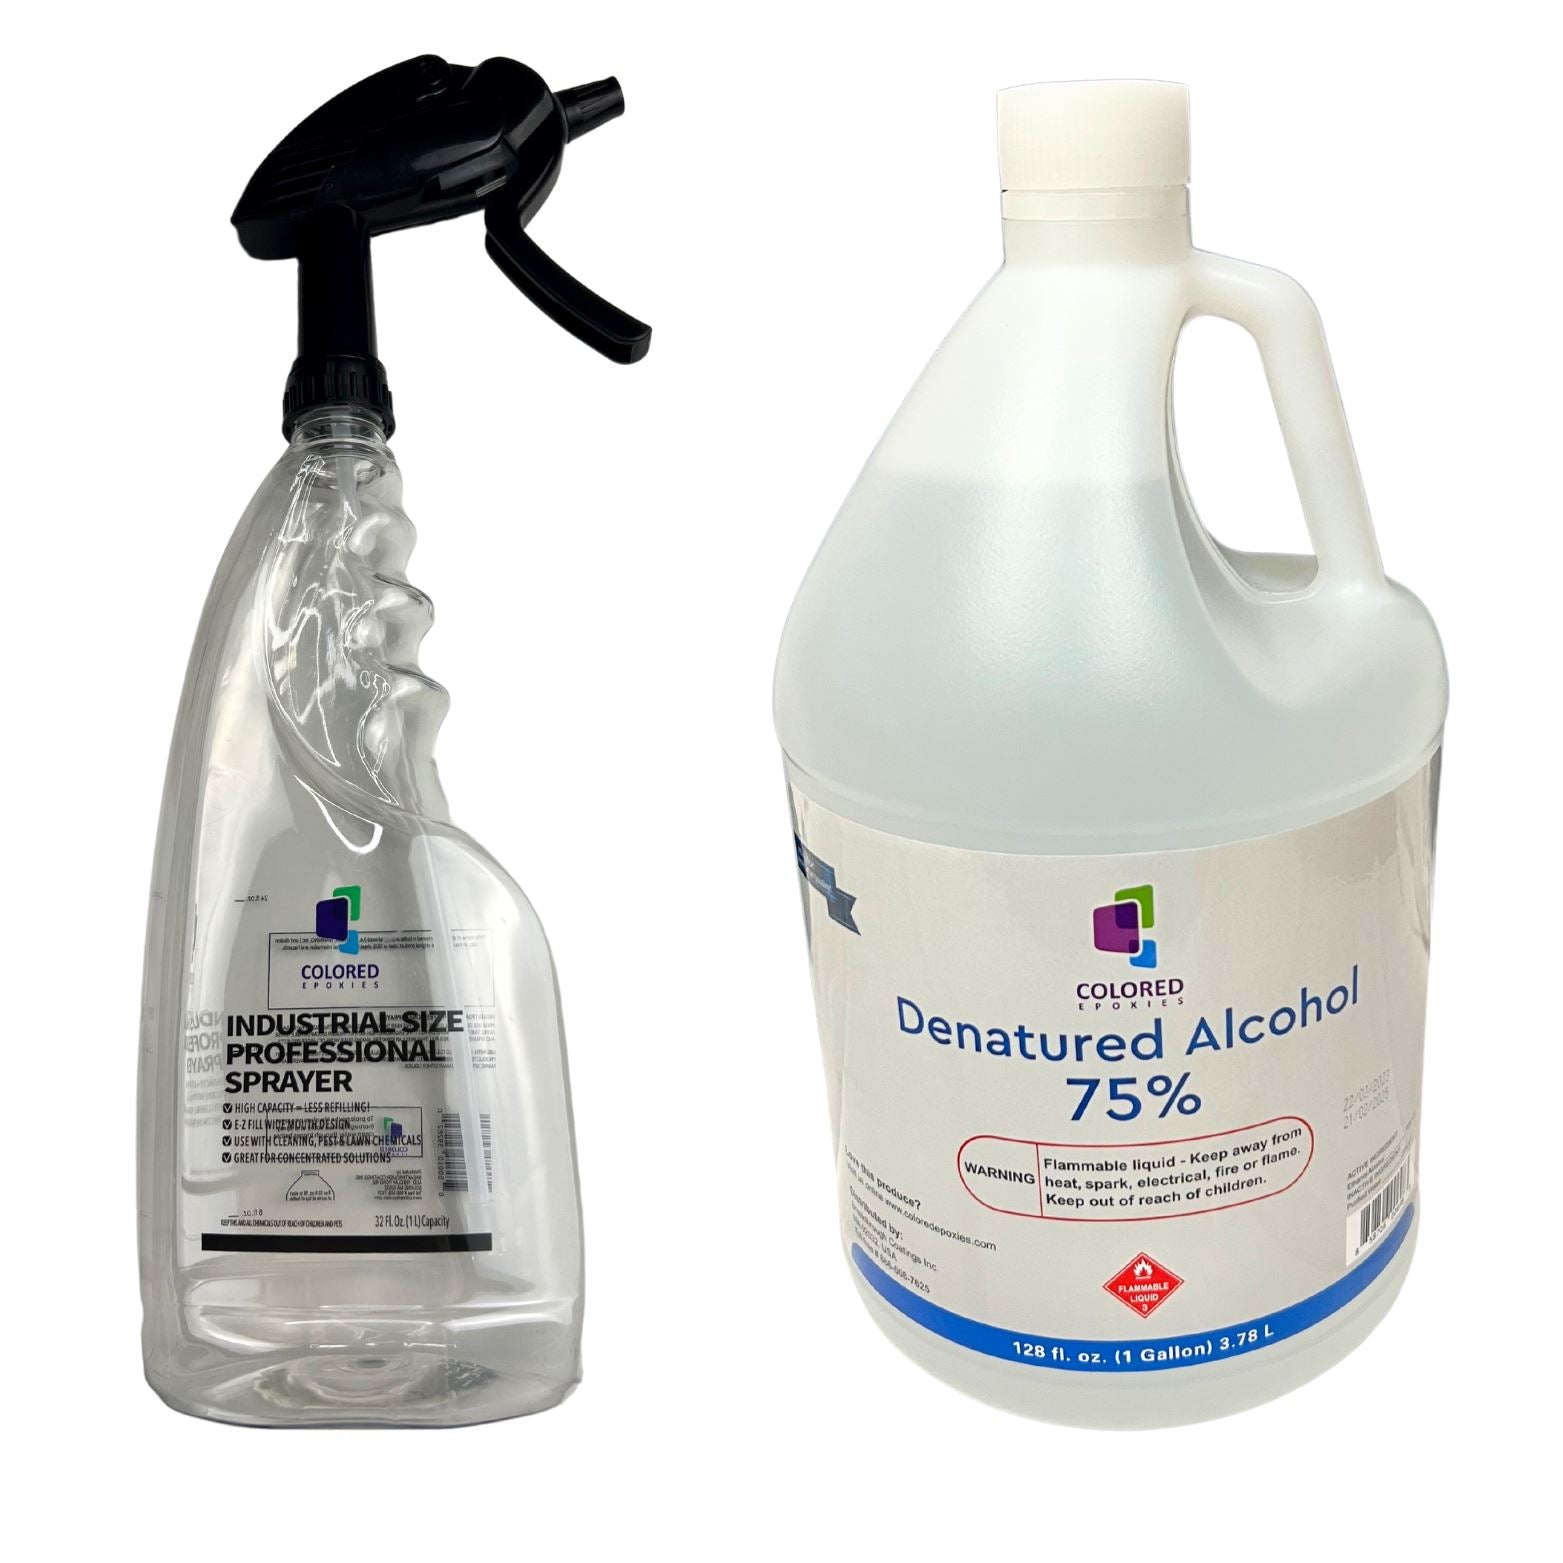 1 Gallon 75% Denatured Alcohol and 1 Spray bottle - Coloredepoxies